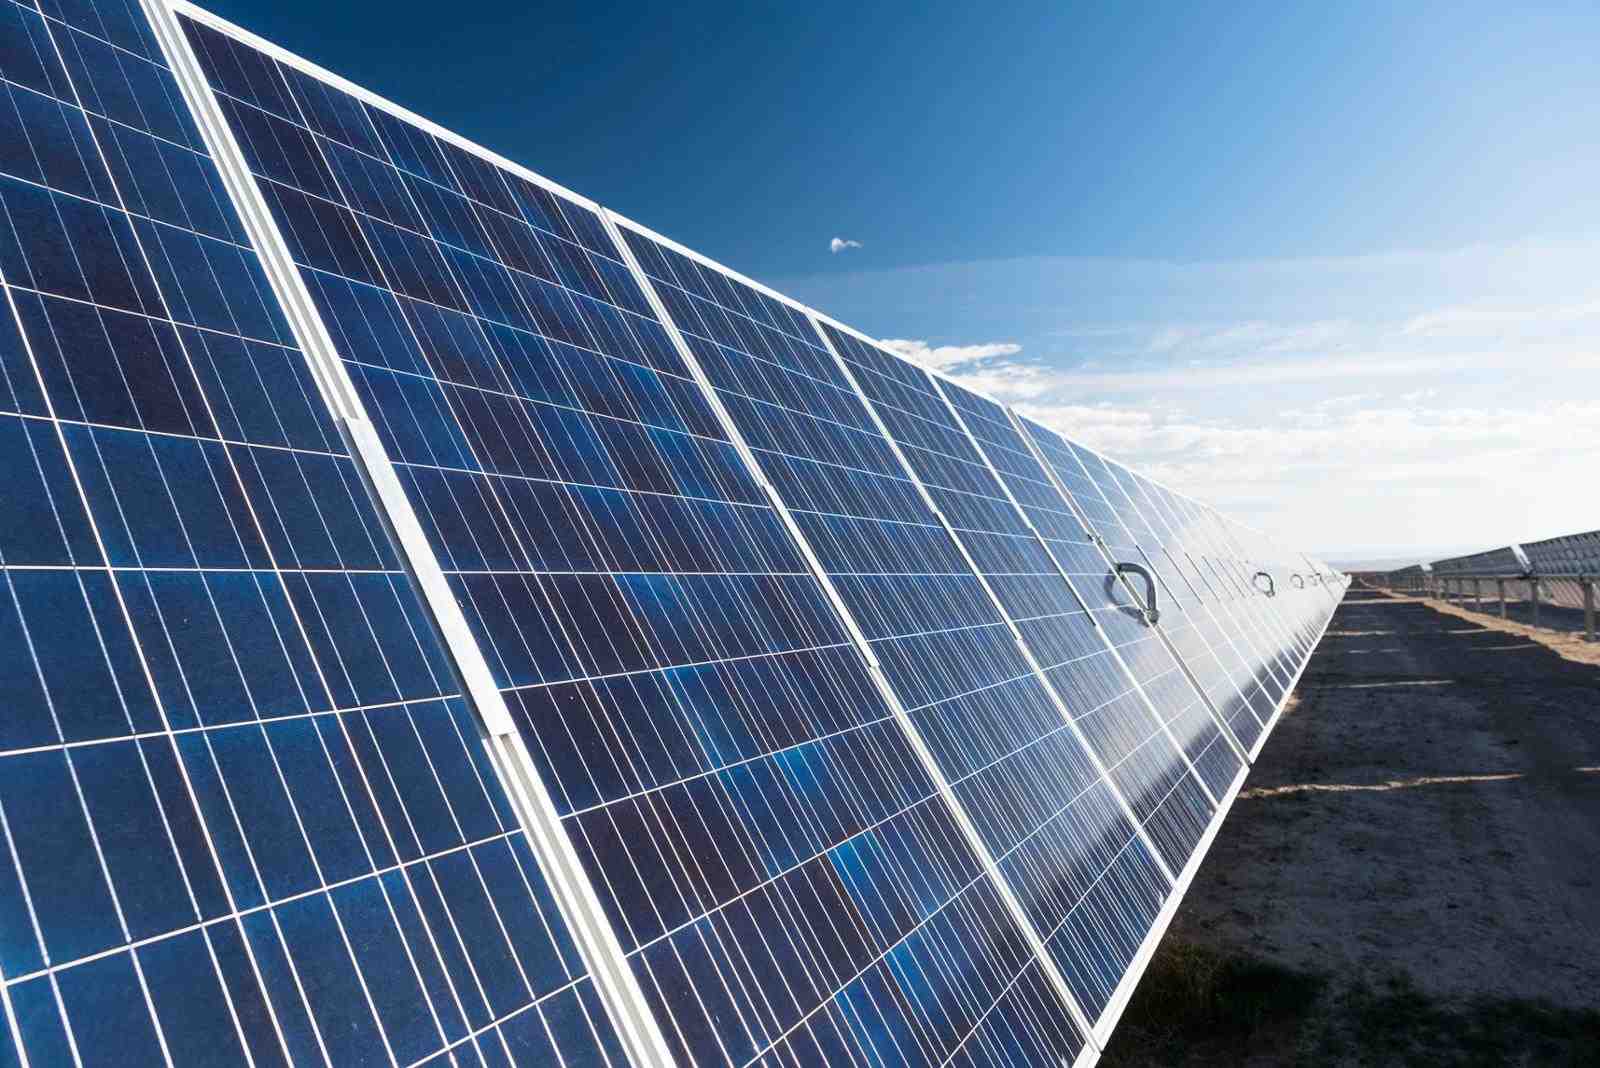 What companies are working on solar power?